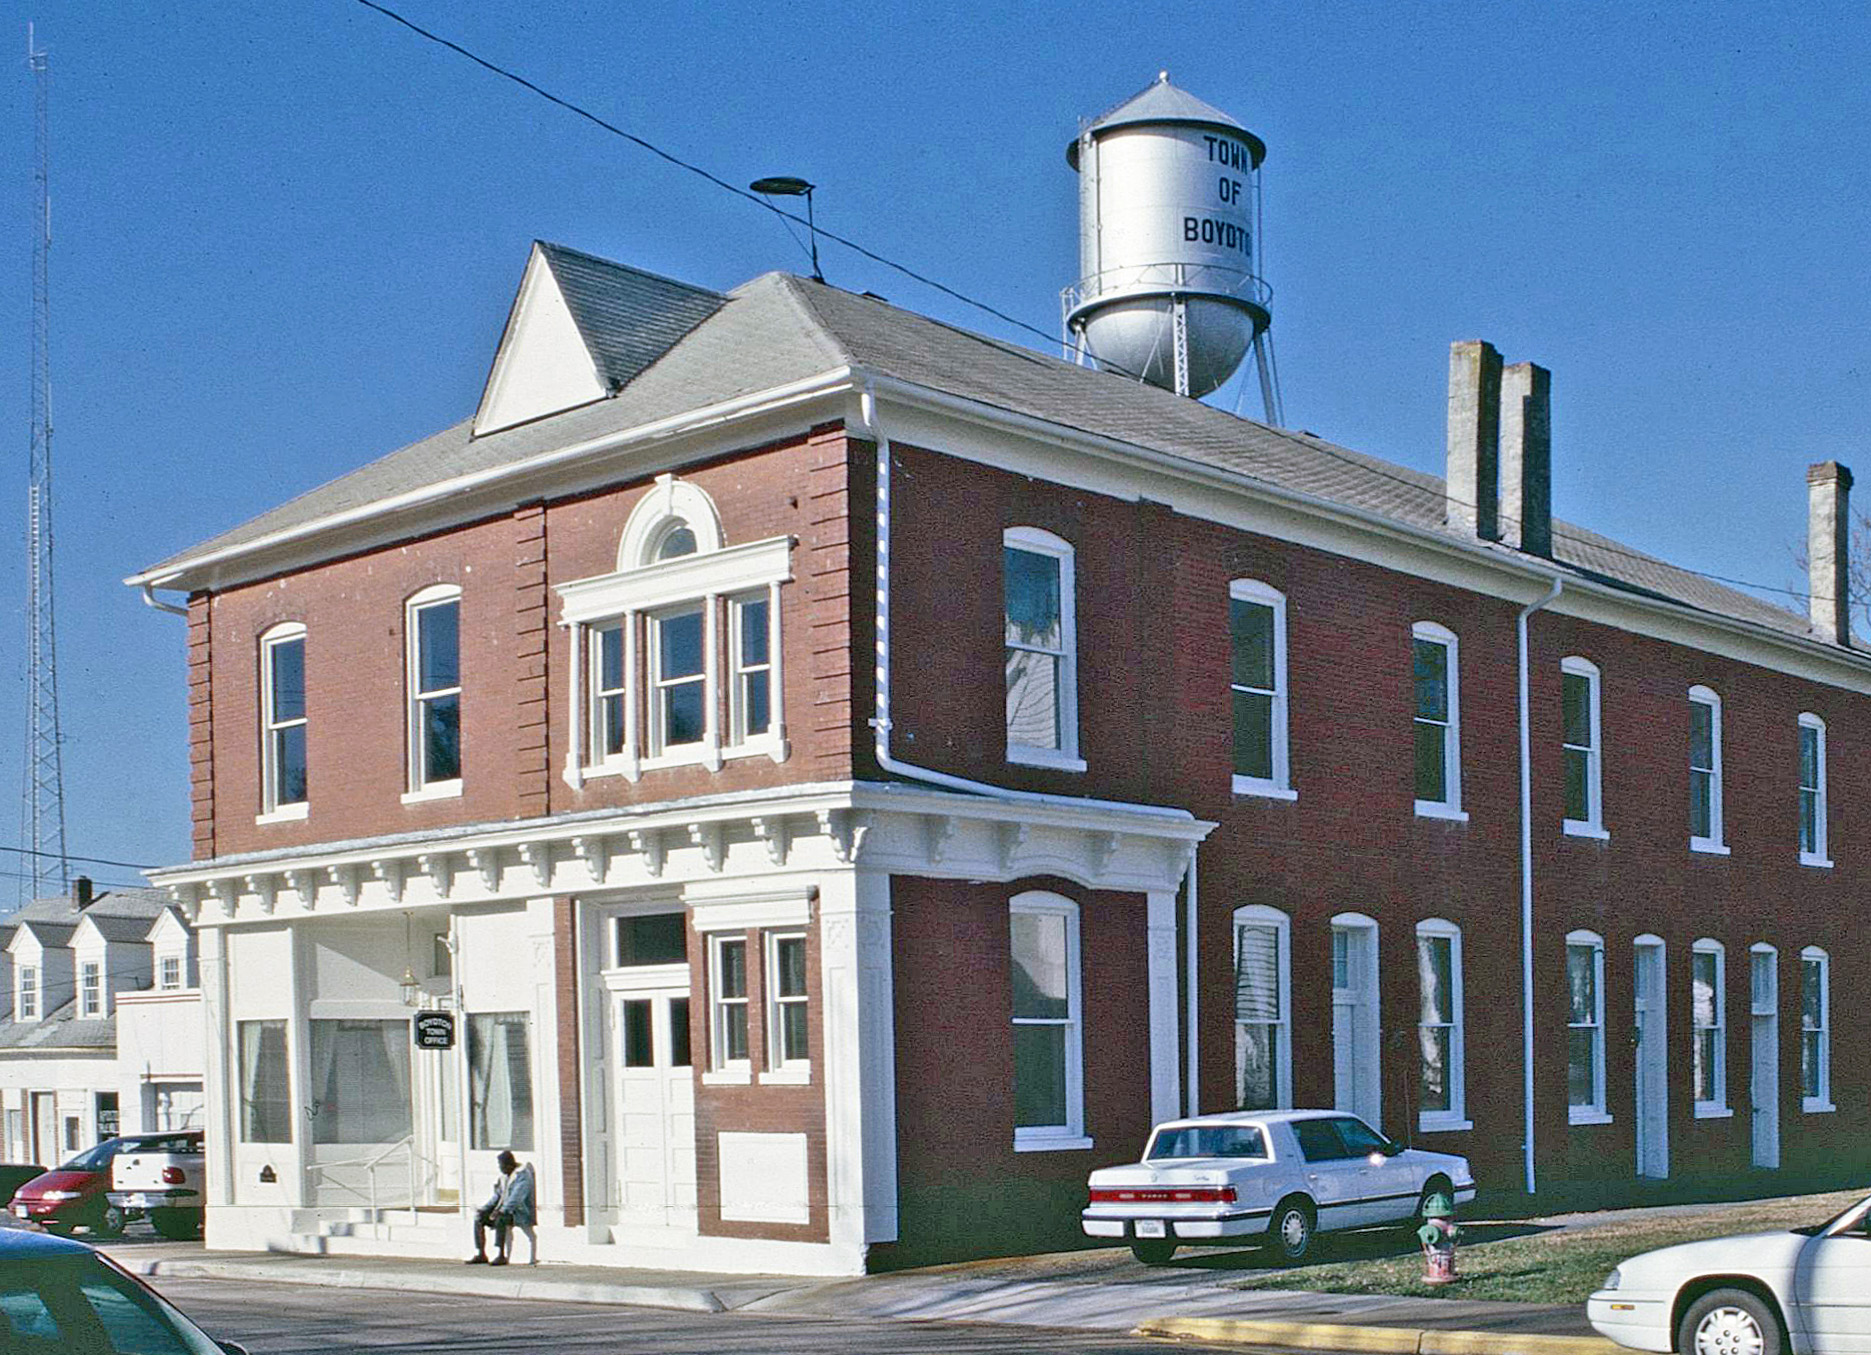 173-5001_Boydton_HD_2000_Old_Town_Hall_VLR_Online